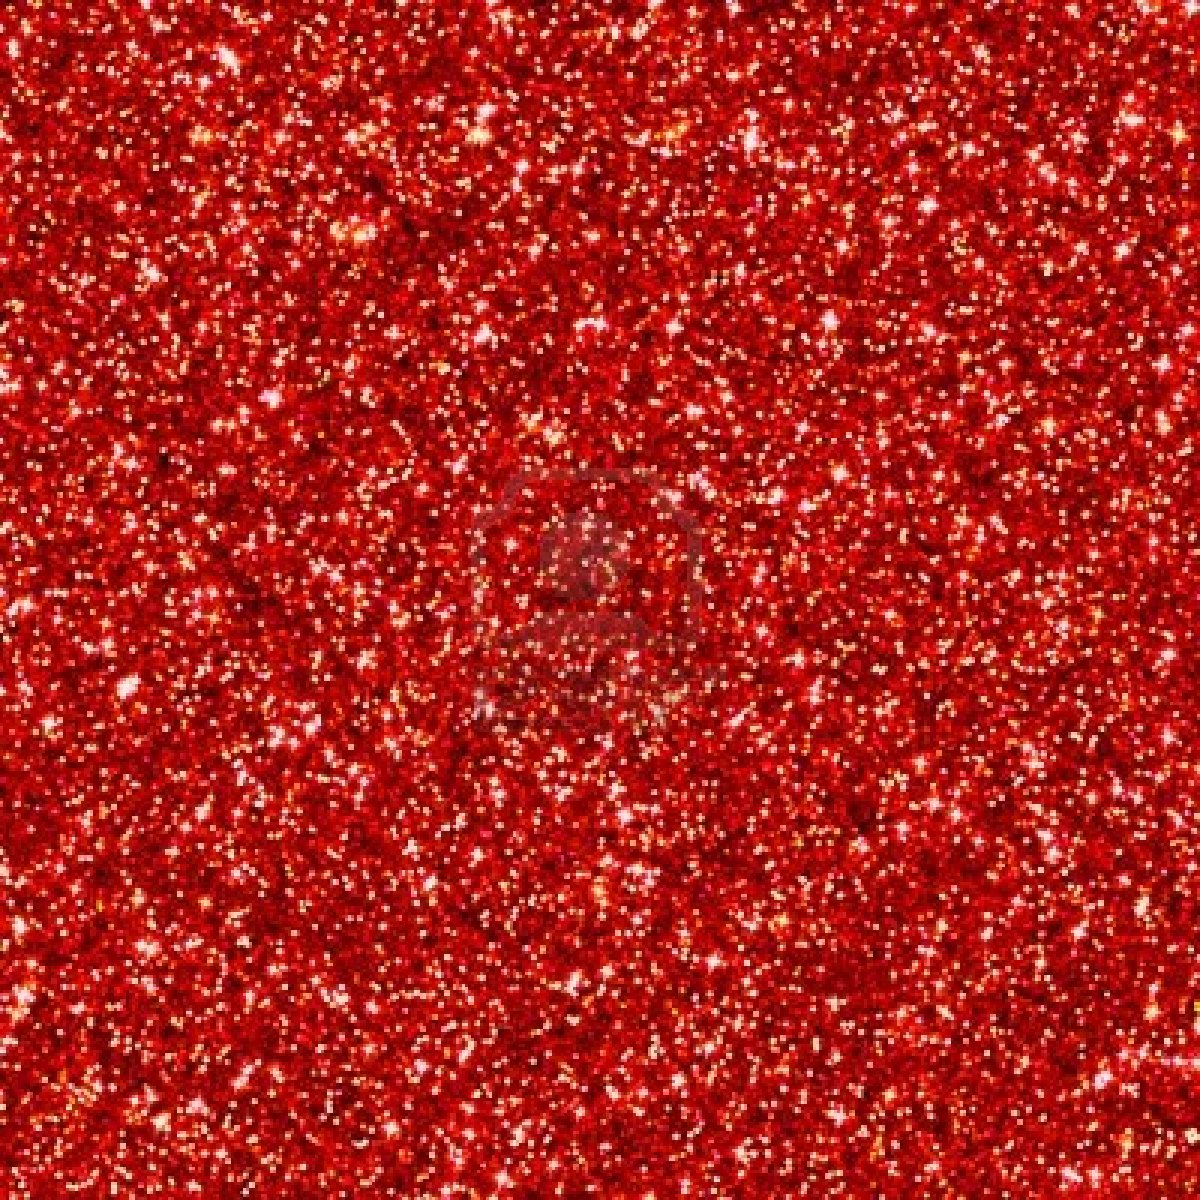 Related Pictures Sparkle Background Red Car